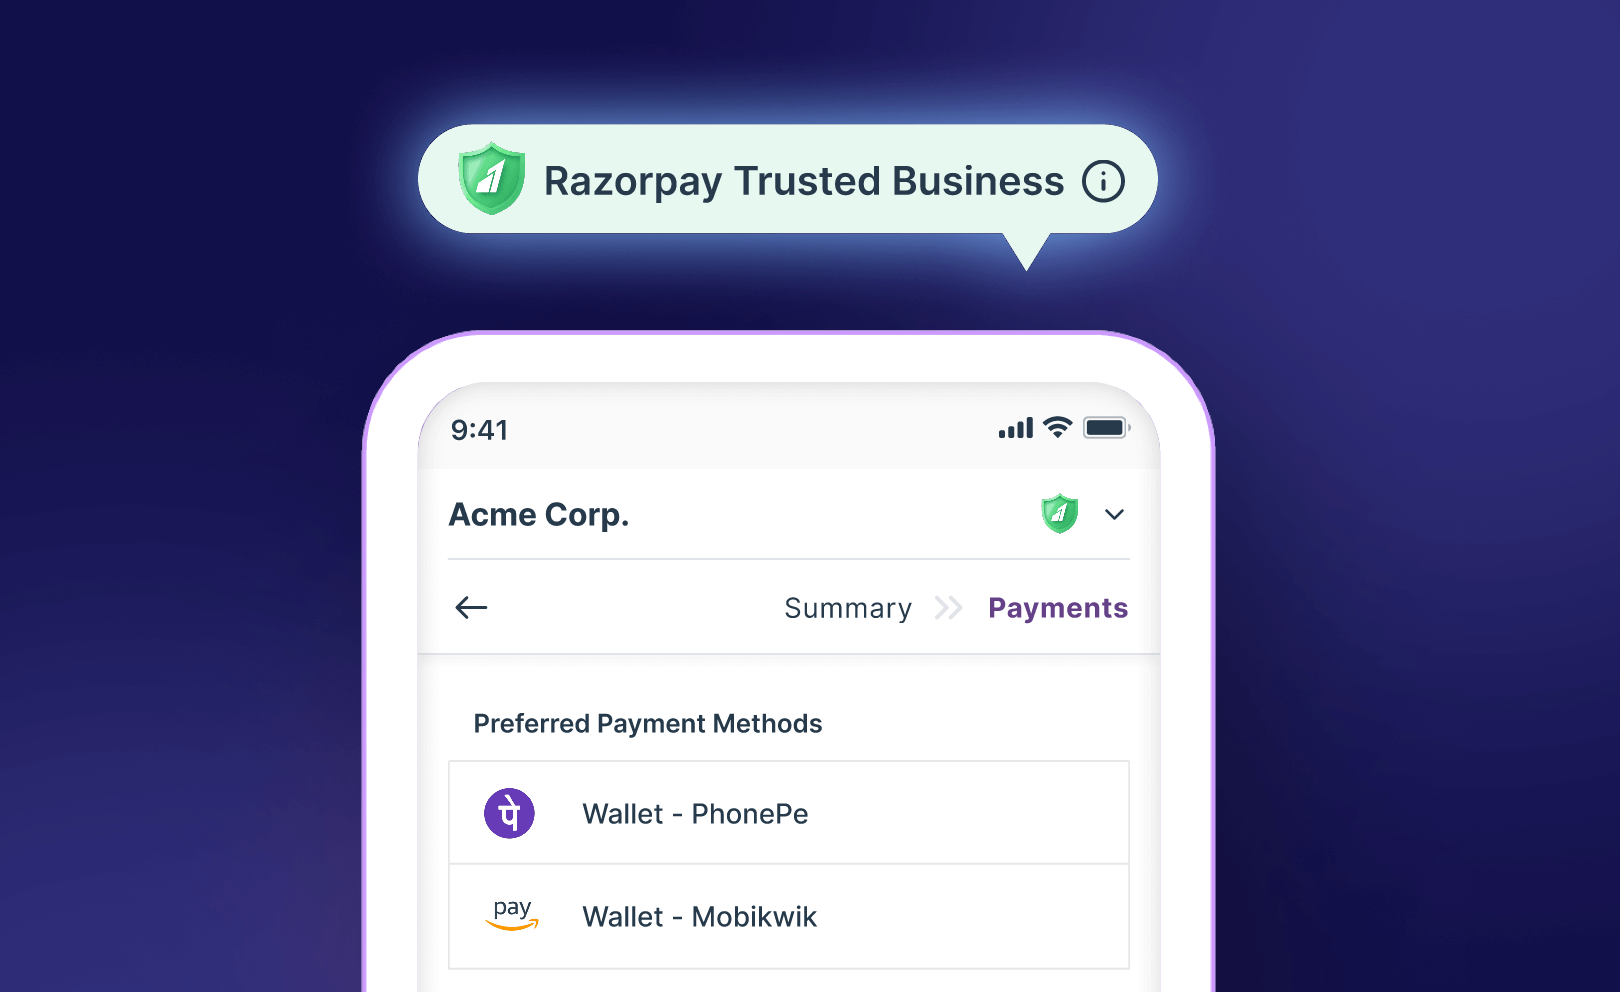 Razorpay trusted business 